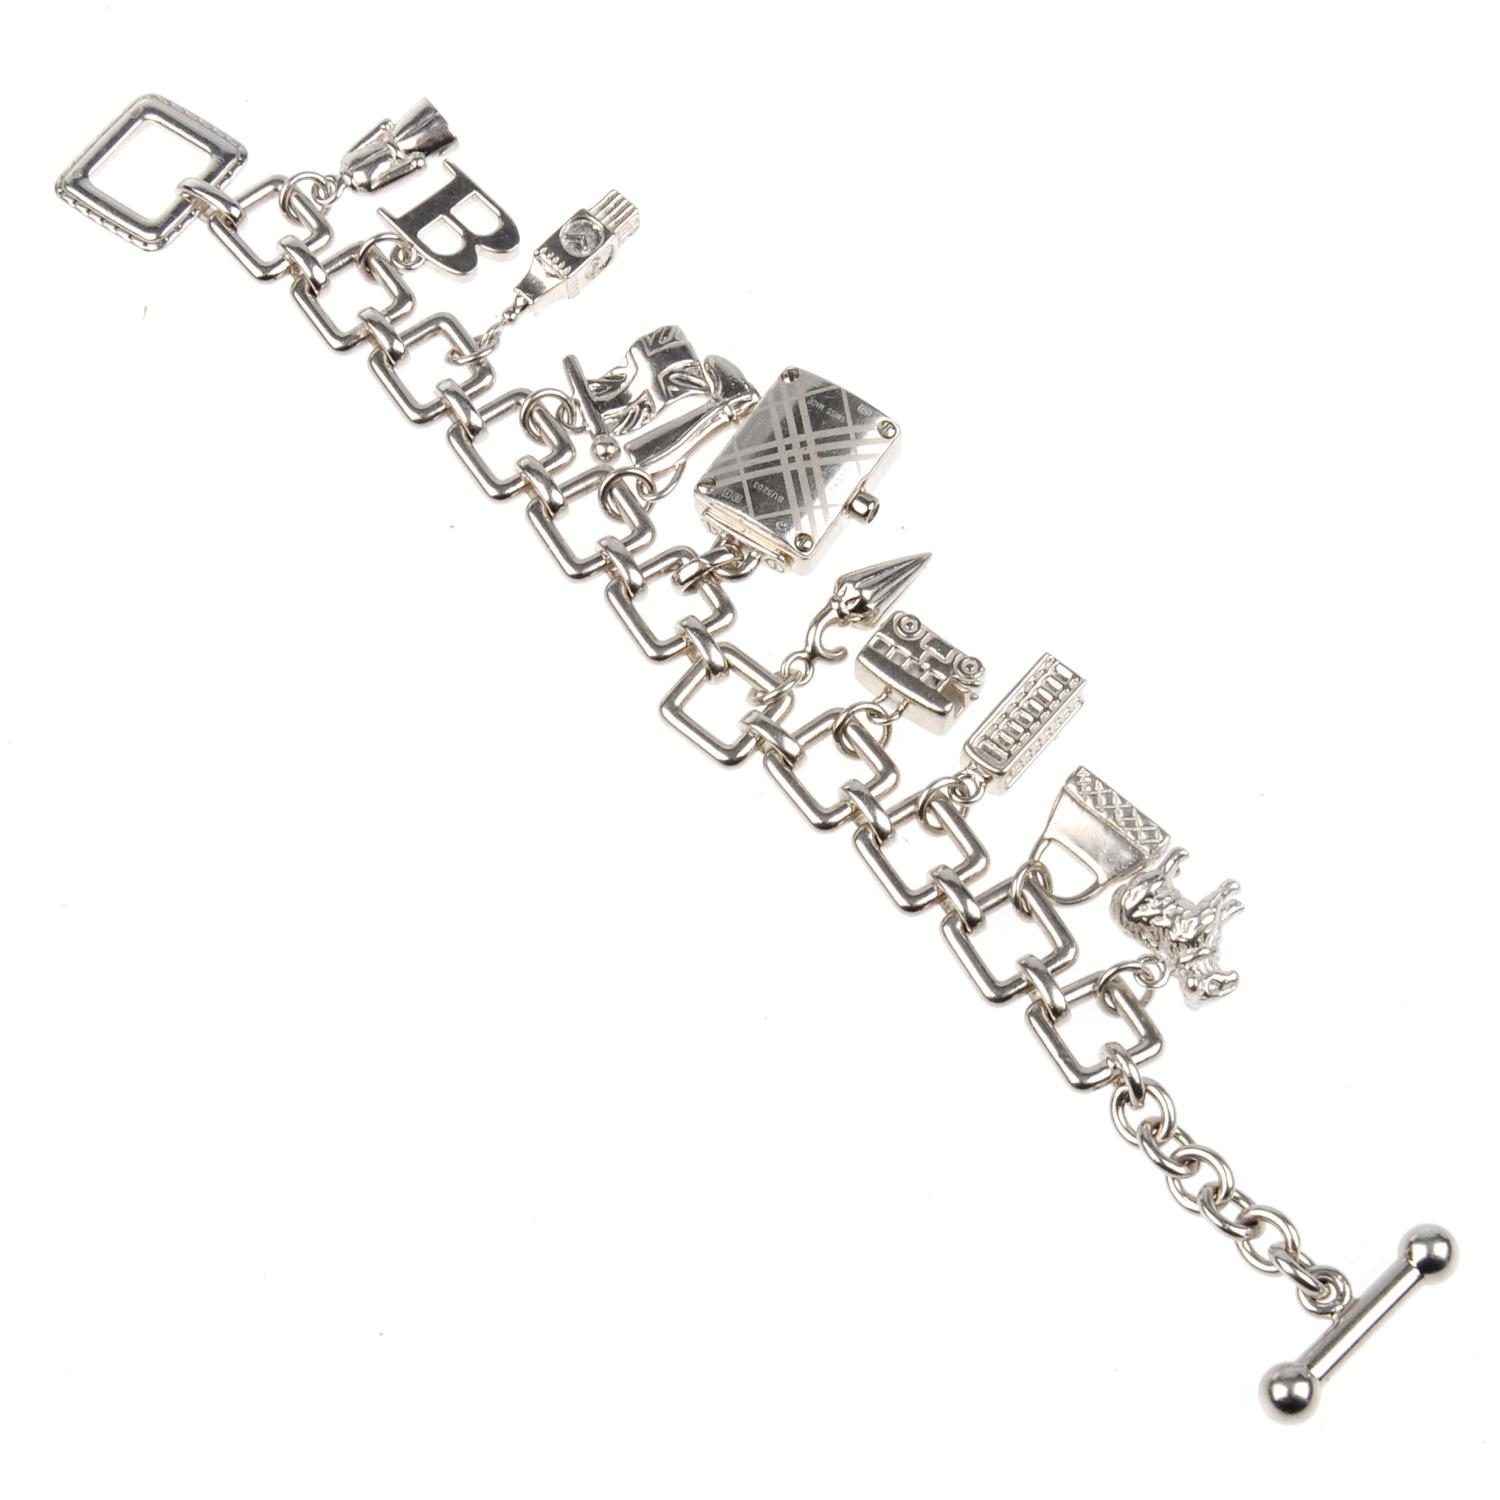 BURBERRY - a lady's silver Signature bracelet watch. - Image 2 of 3